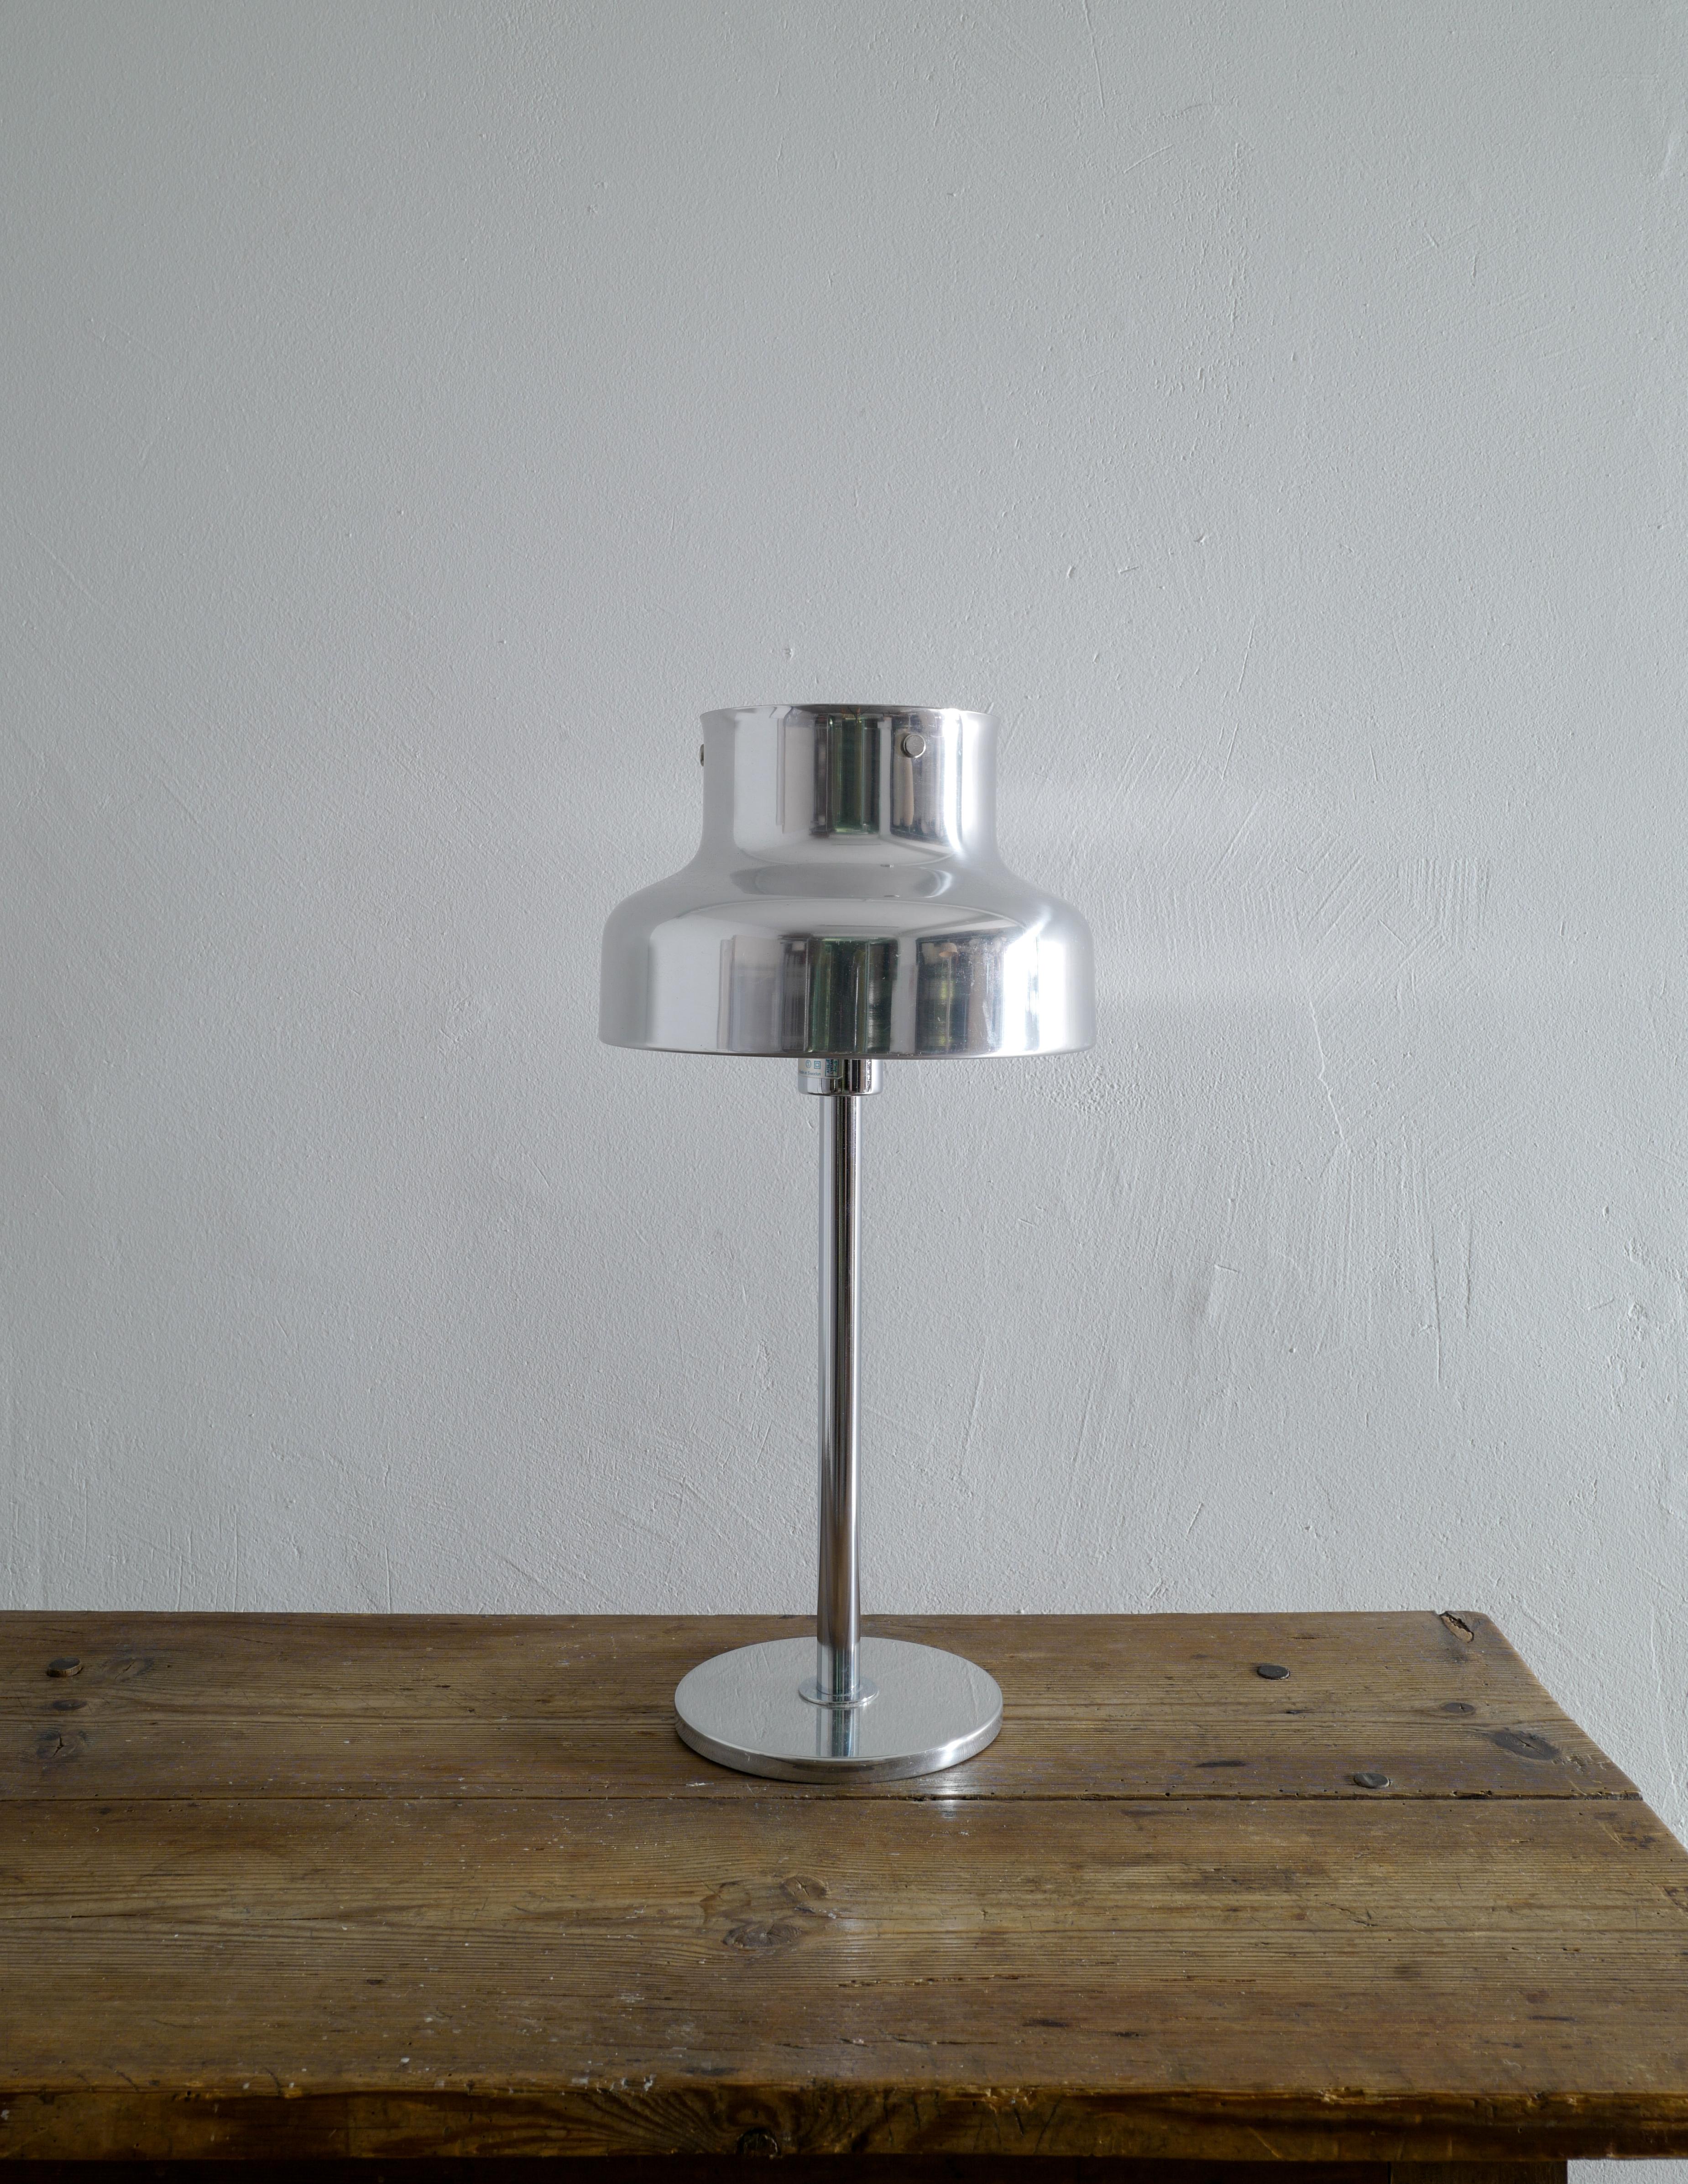 Rare mid-century table lamp in a chrome finish designed by Anders Pehrson for Ateljé Lyktan in Sweden and produced in the 1960s. In good vintage condition with the original sticker still on and showing some signs from age and use.